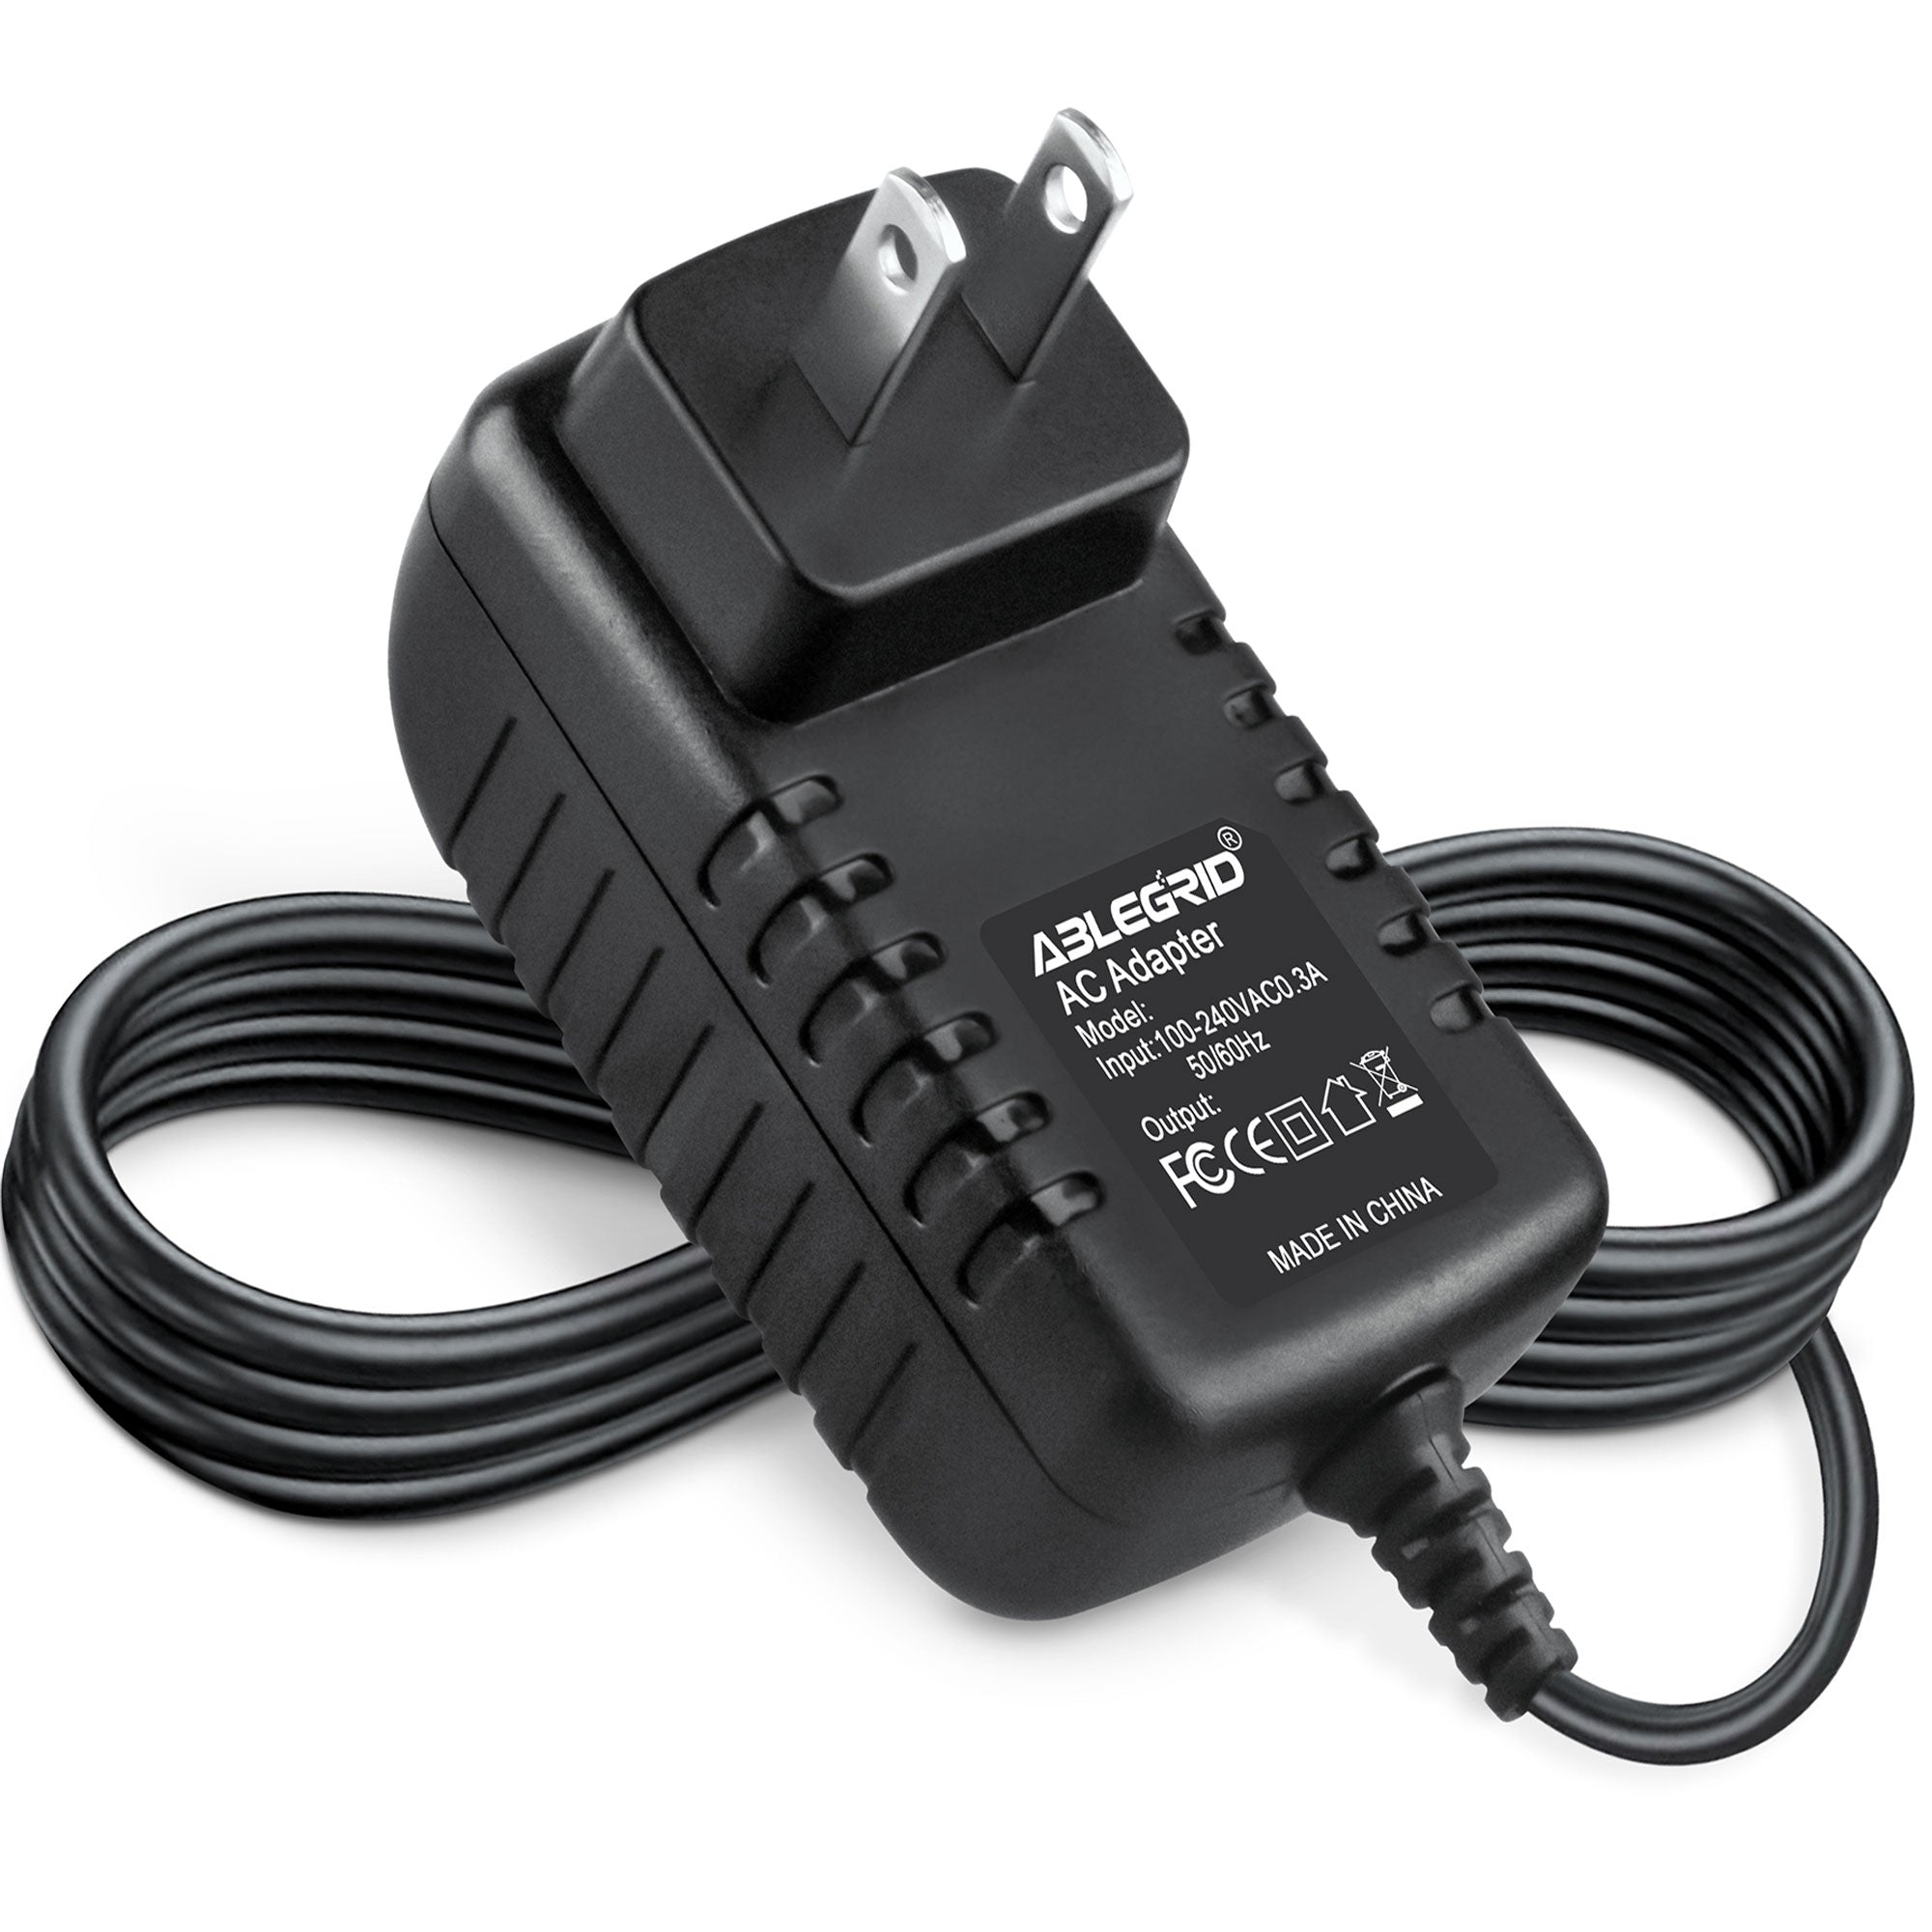 AbleGrid AC-DC Adapter for Model: RHD0100350 10V Walkie Talkie Power Supply Cord Cable PS Wall Home Charger Mains PSU